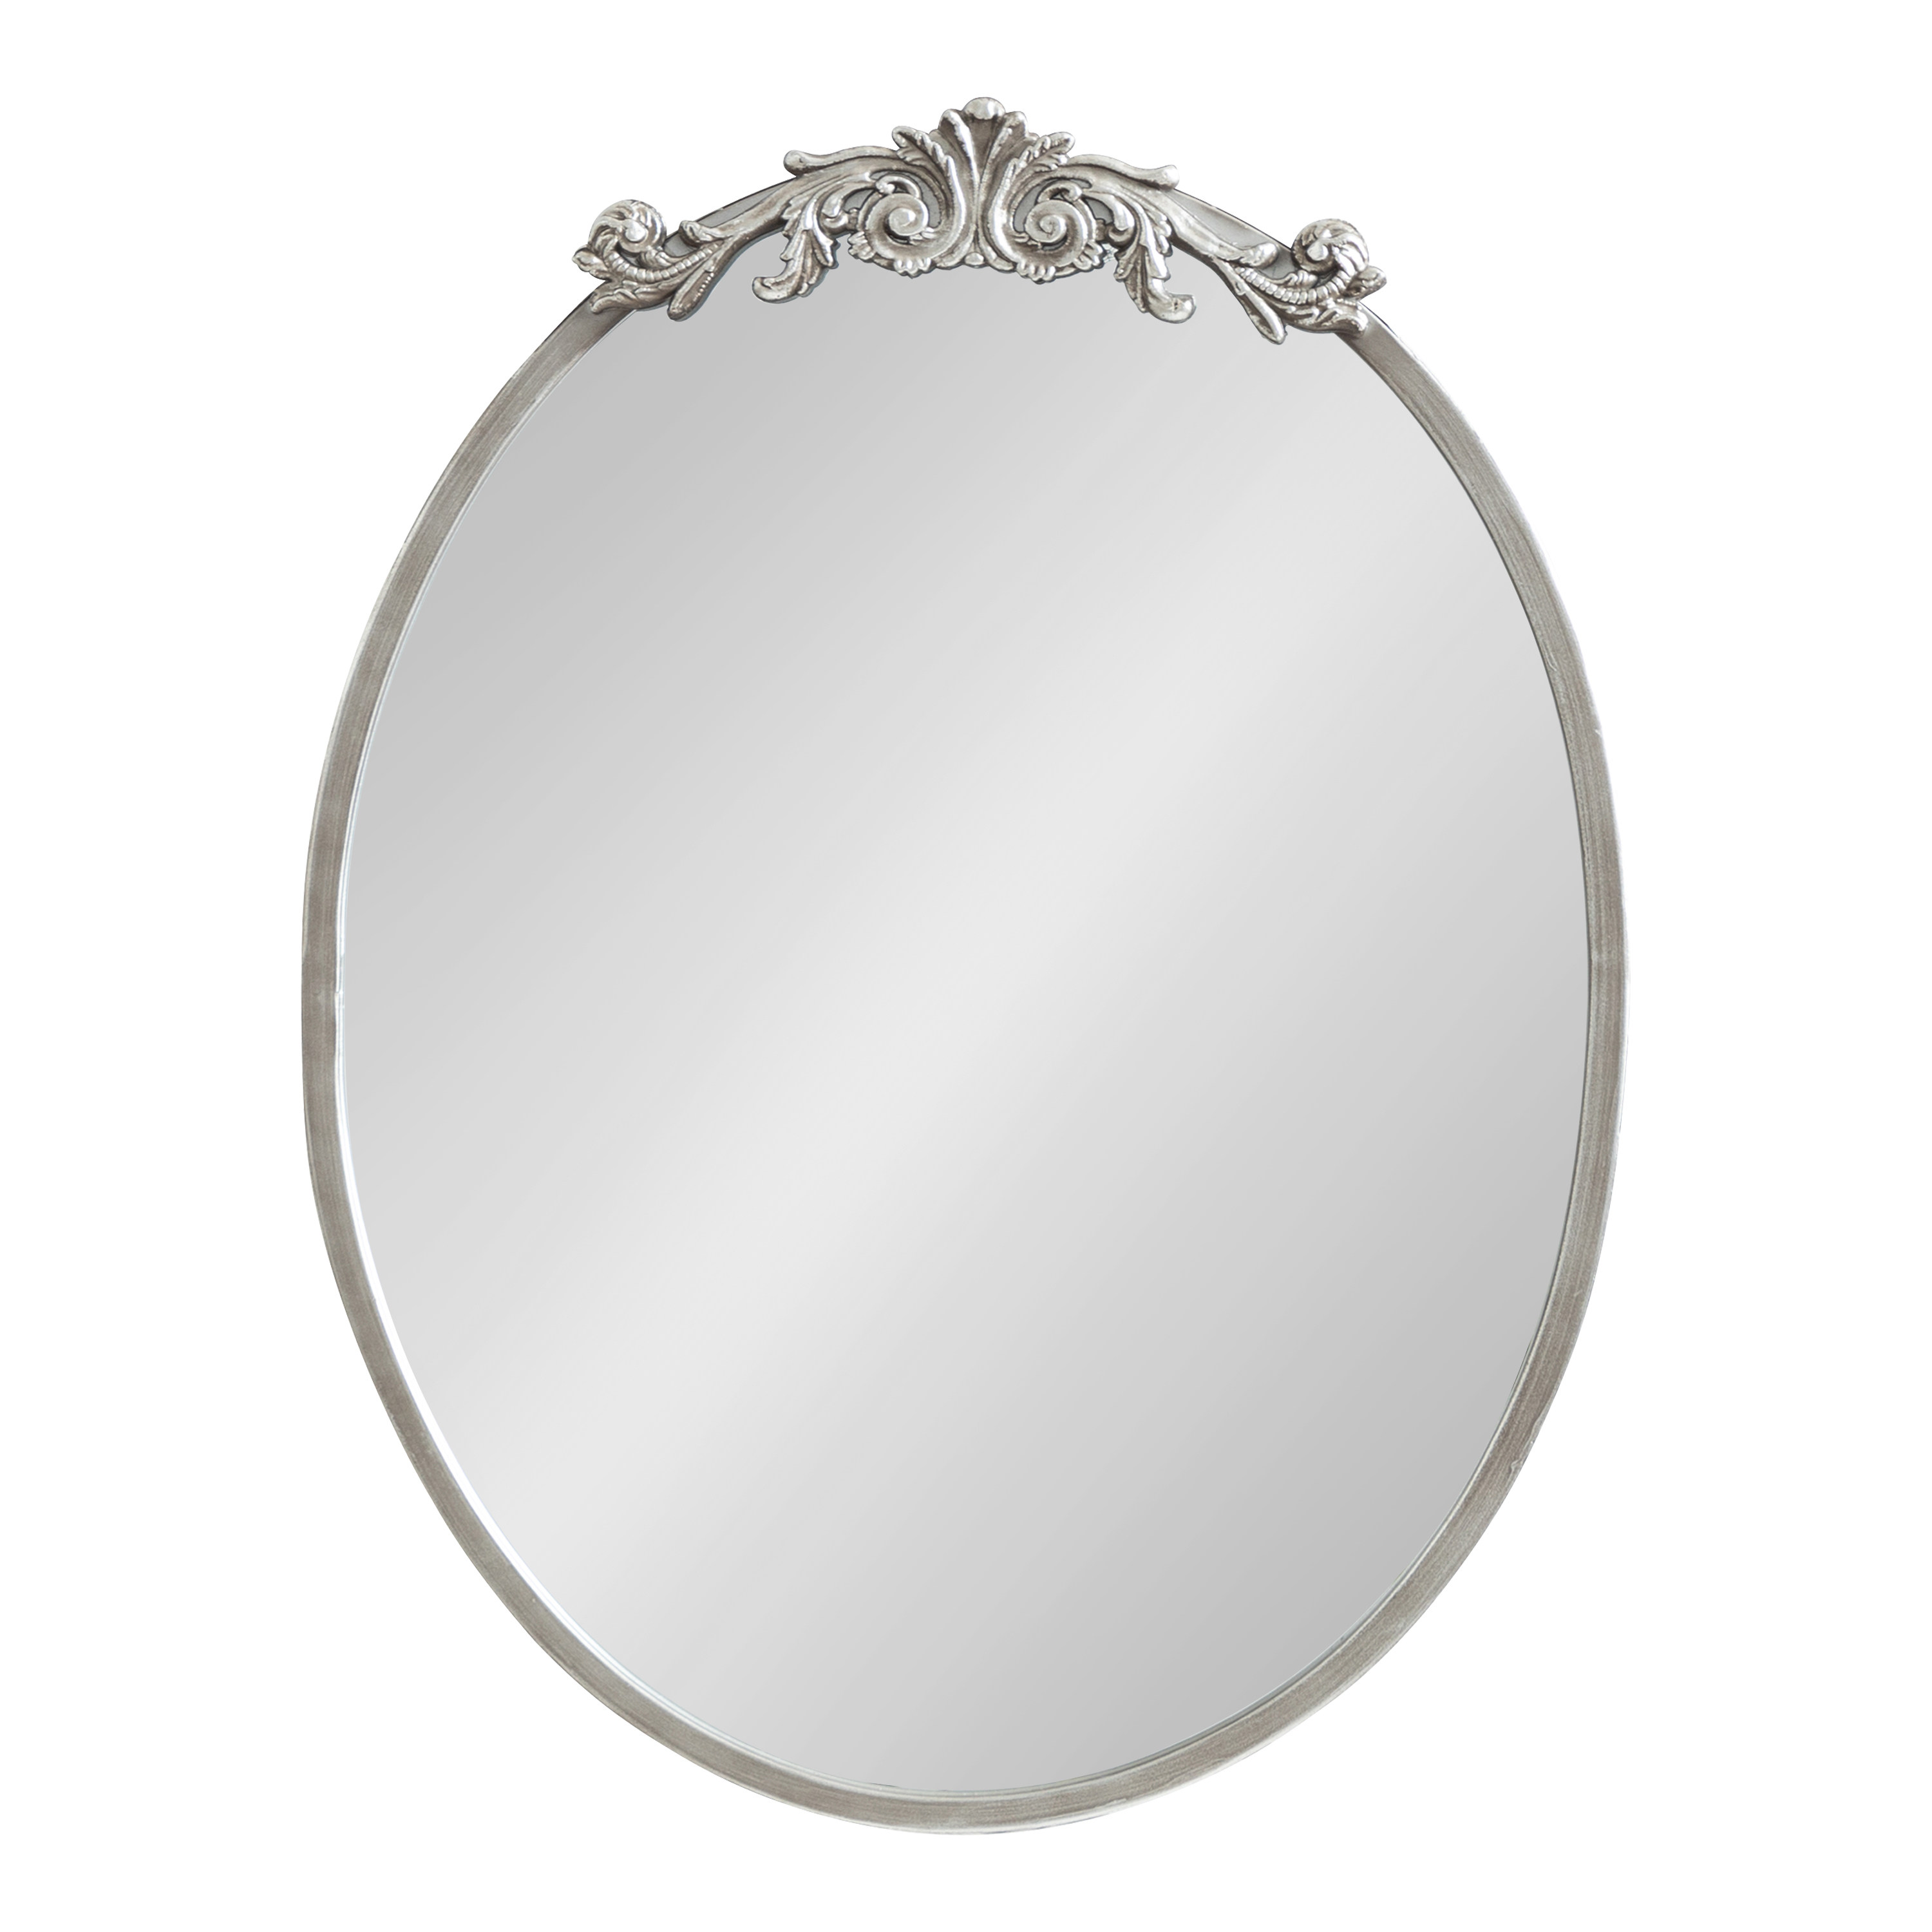 Kate and Laurel Arendahl Ornate Glam Oval Wall Mirror, 18 x 24, Antique  Silver, Beautiful Bohemian Mirror for Wall